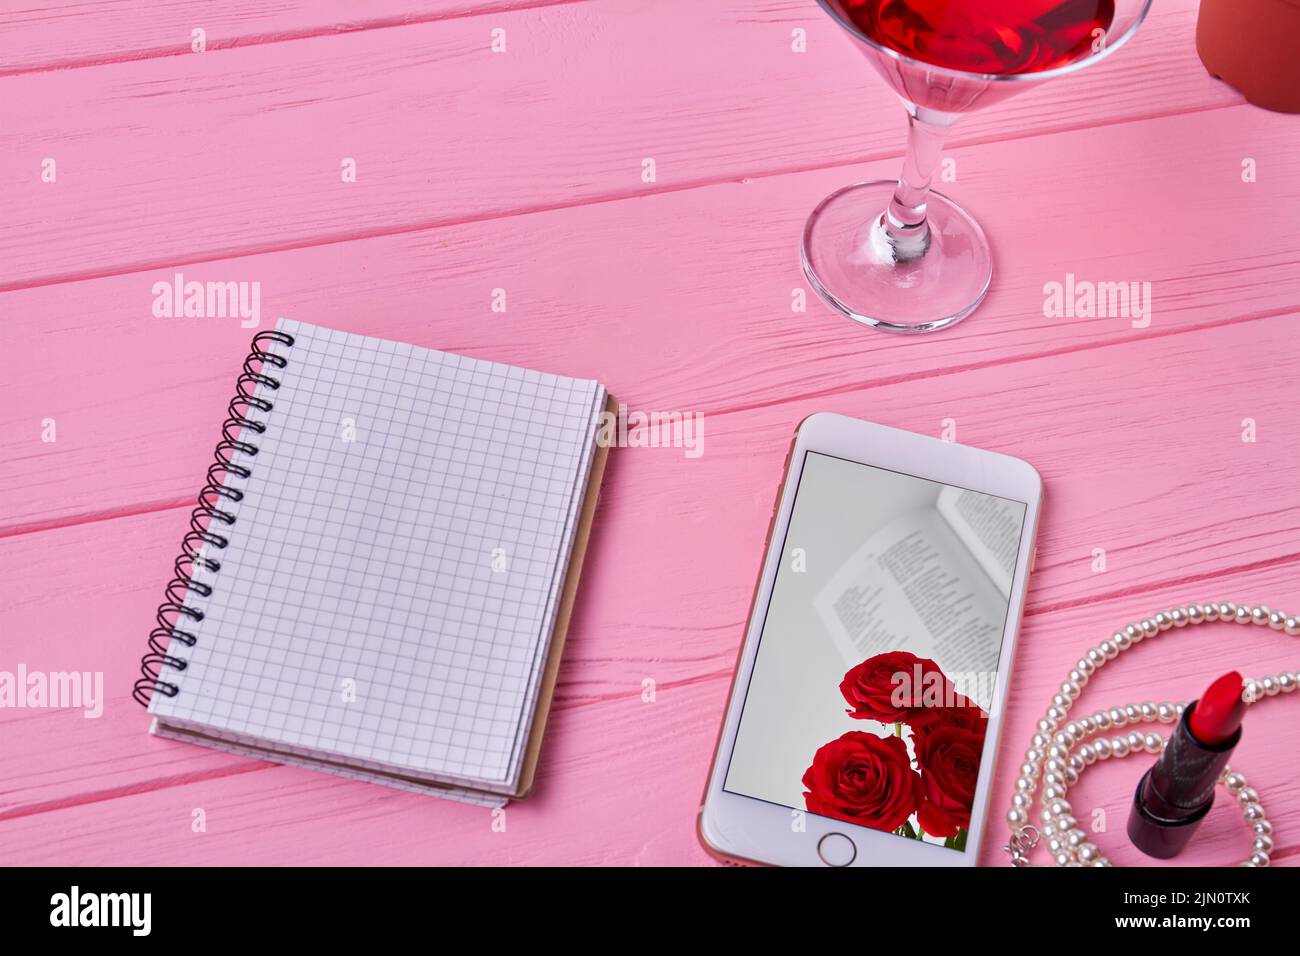 Top view open notepad with blank page and smartphone. Pink wooden desk. Stock Photo